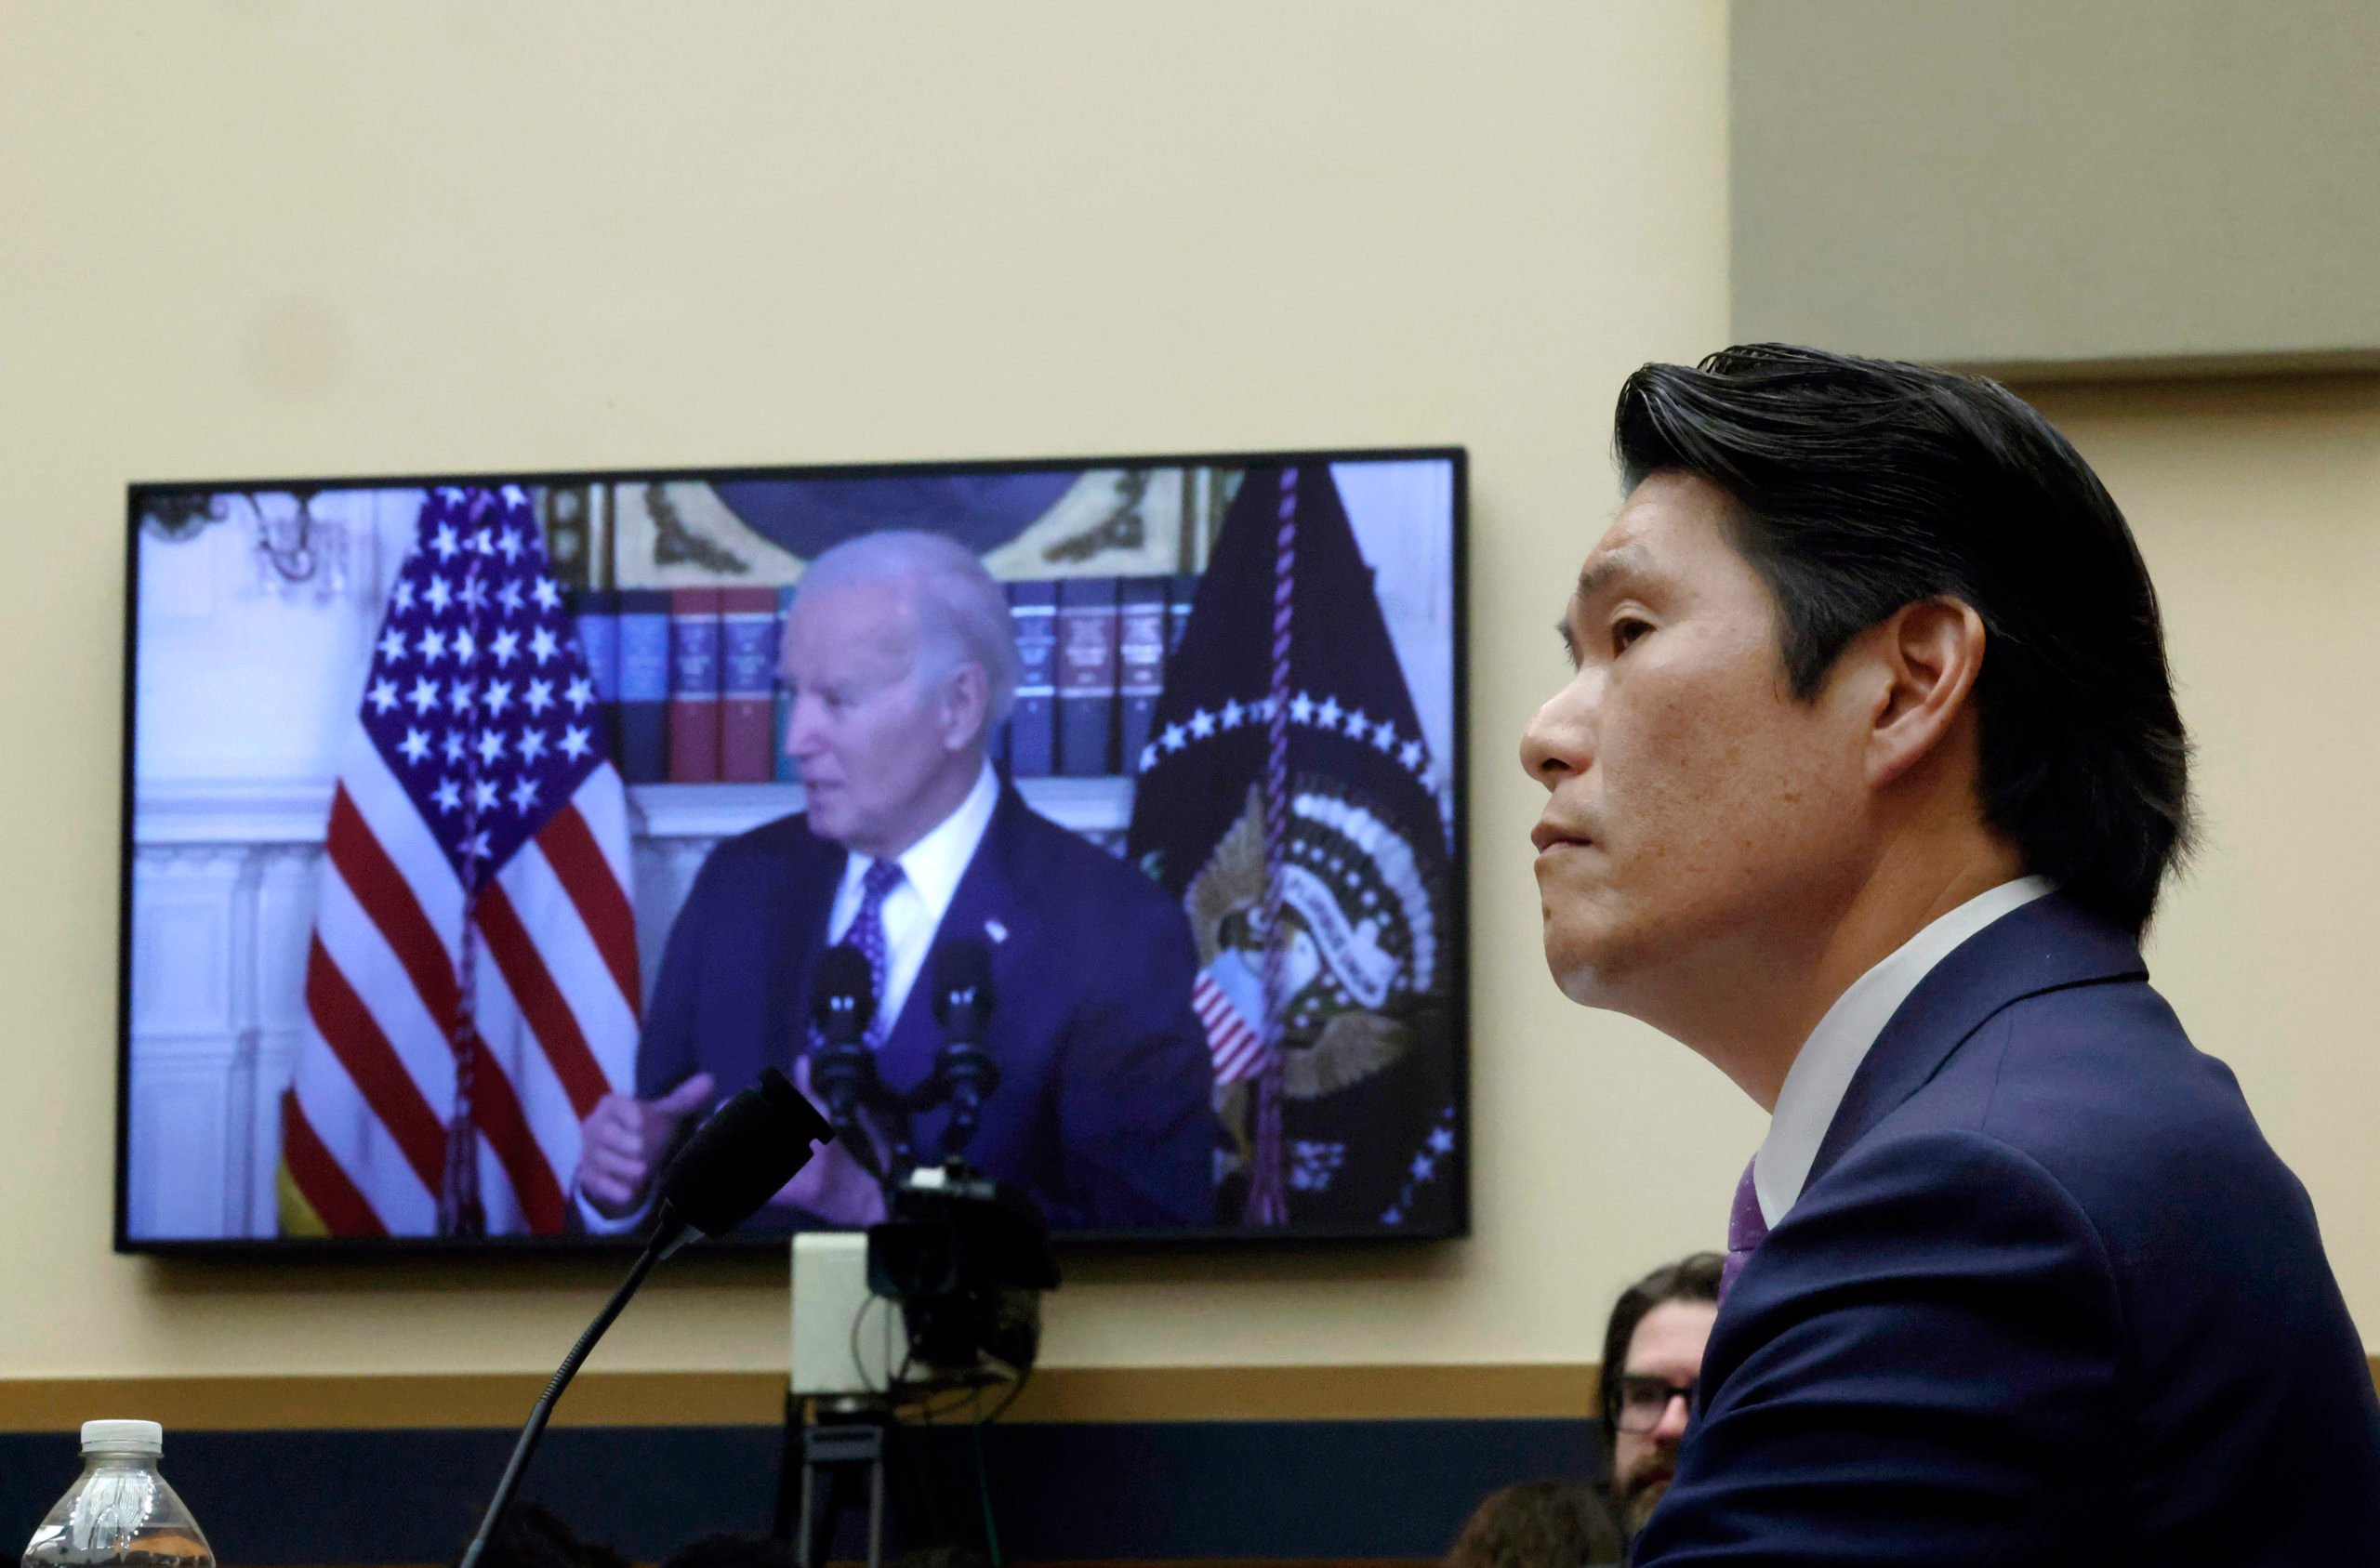 WASHINGTON, DC - MARCH 12: Former Special Counsel Robert K. Hur testifies alongside a video of President Joe Biden before the House Judiciary Committee on March 12, 2024 in Washington, DC. Hur investigated U.S. President Joe Biden’s mishandling of classified documents and published a final report with contentious conclusions about Biden’s memory. (Photo by Chip Somodevilla/Getty Images)